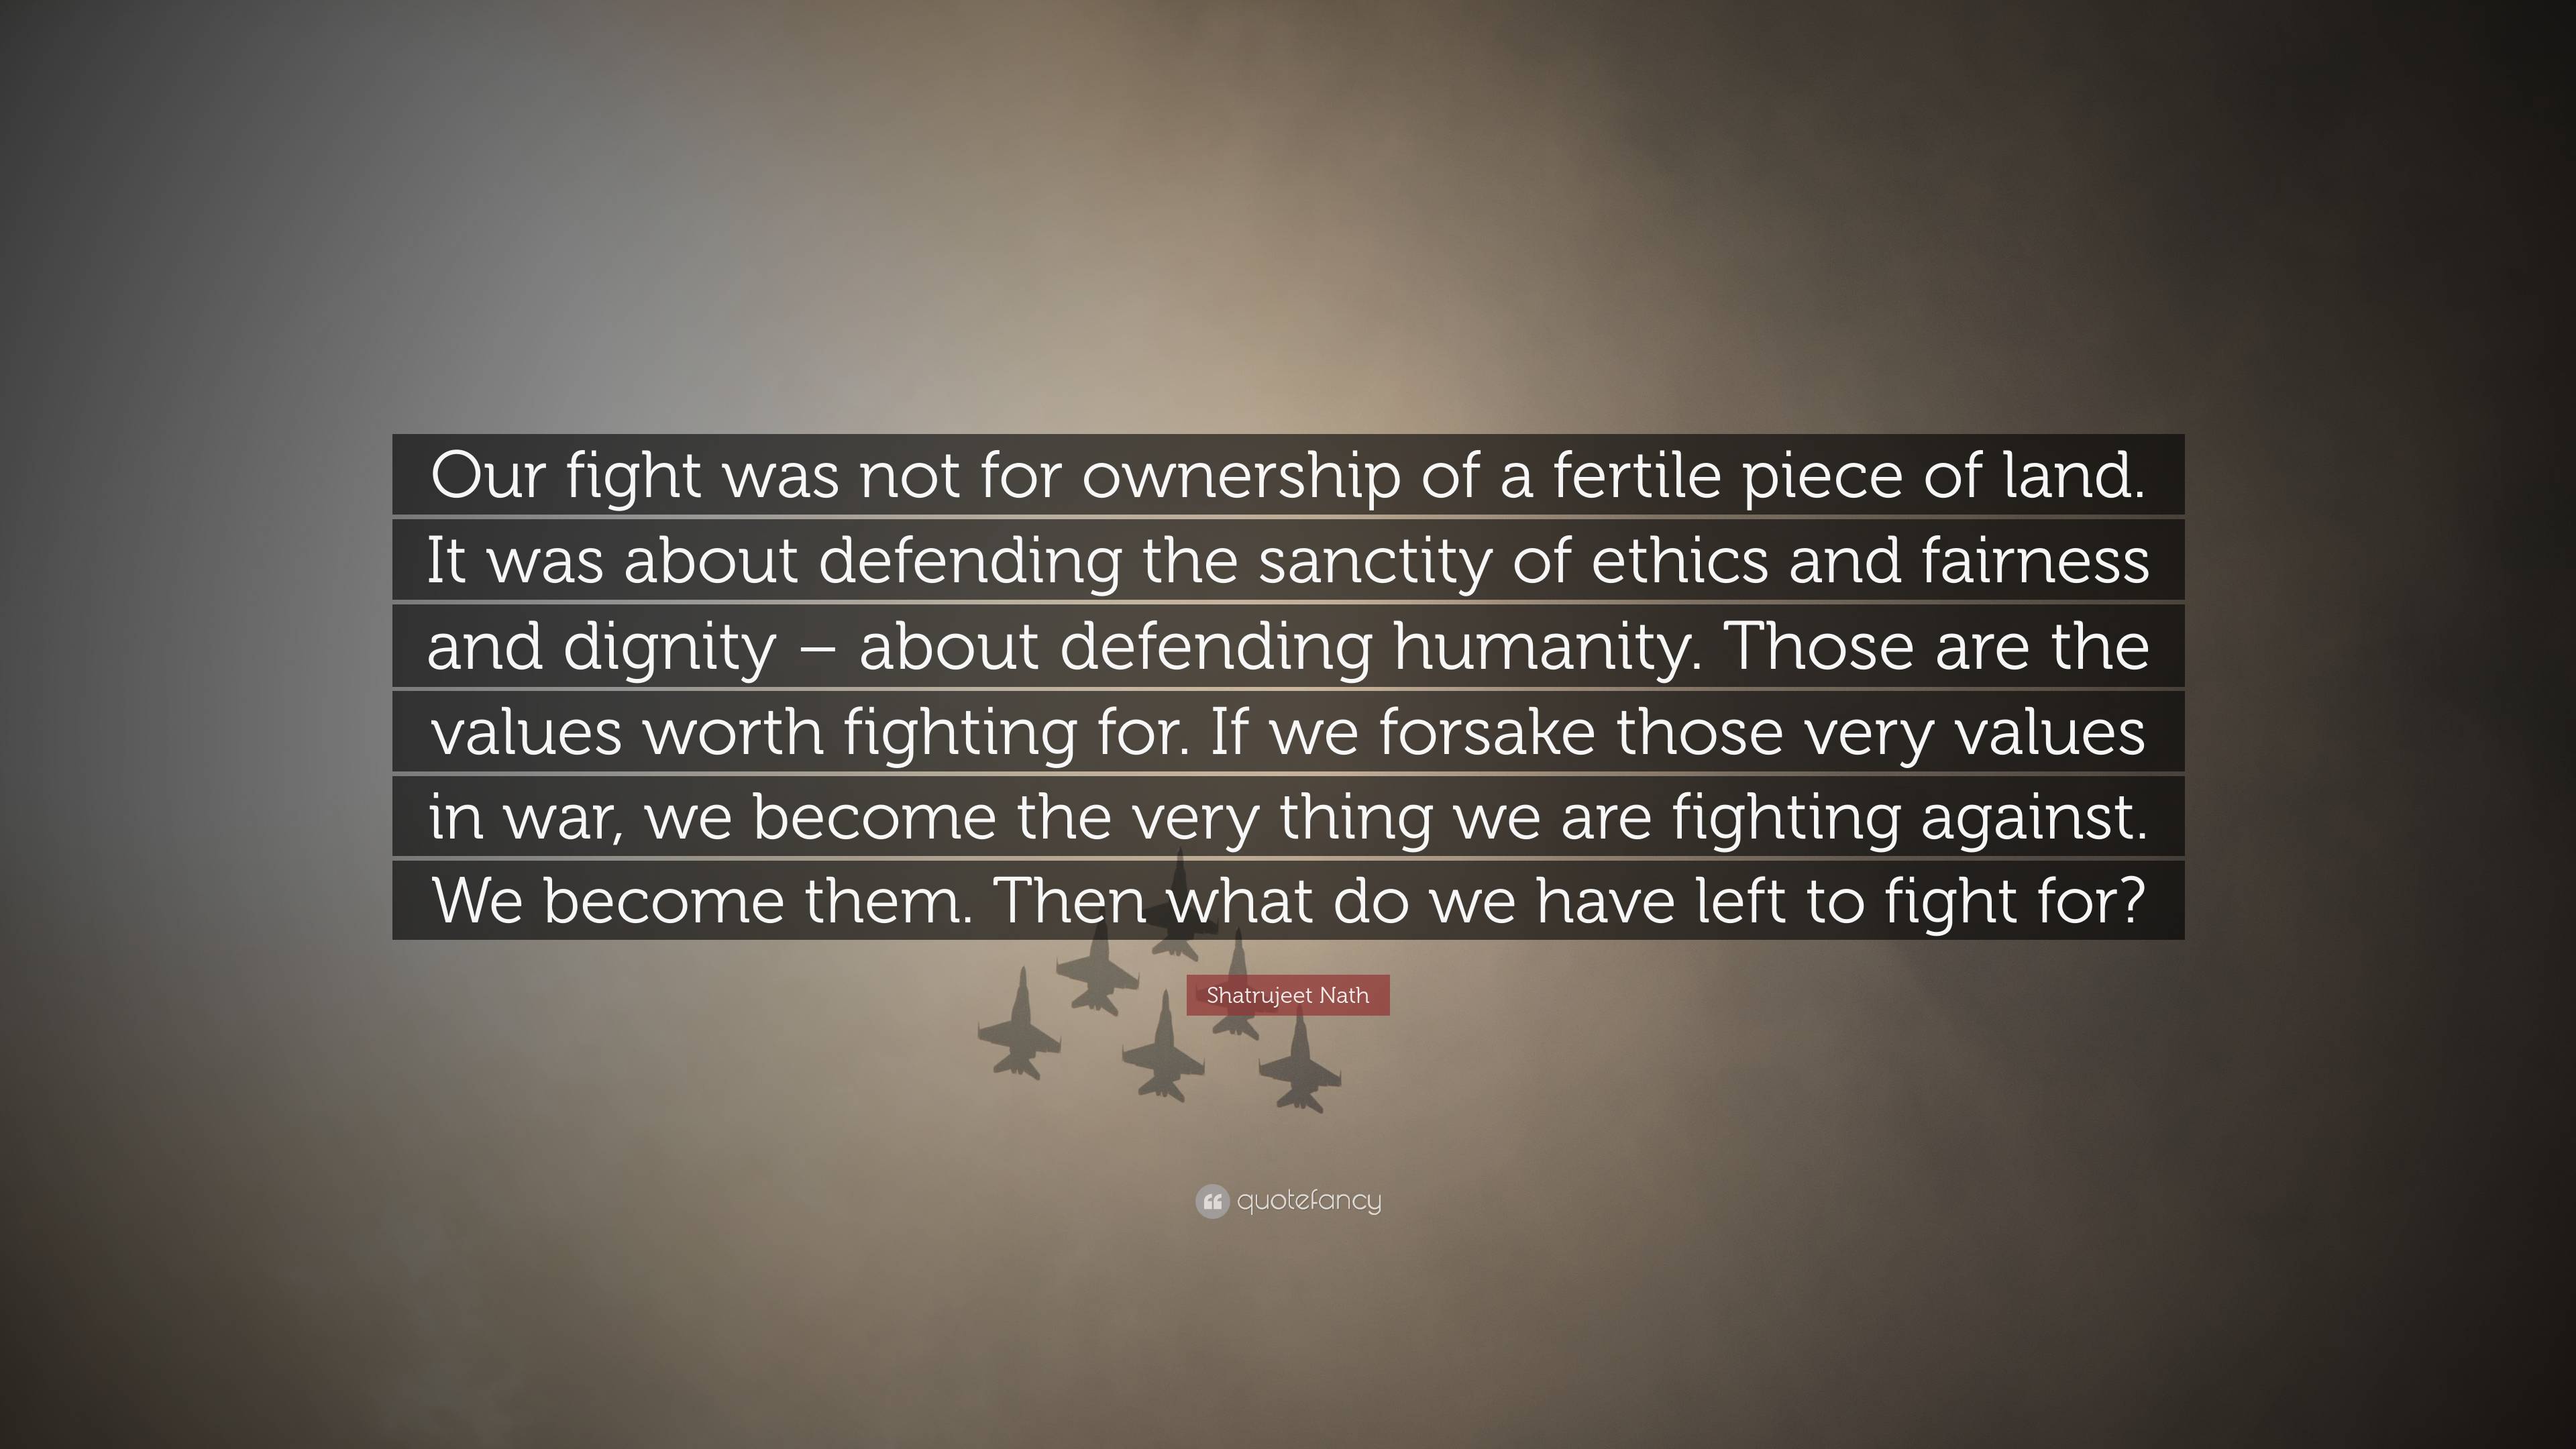 Shatrujeet Nath Quote: “Our fight was not for ownership of a